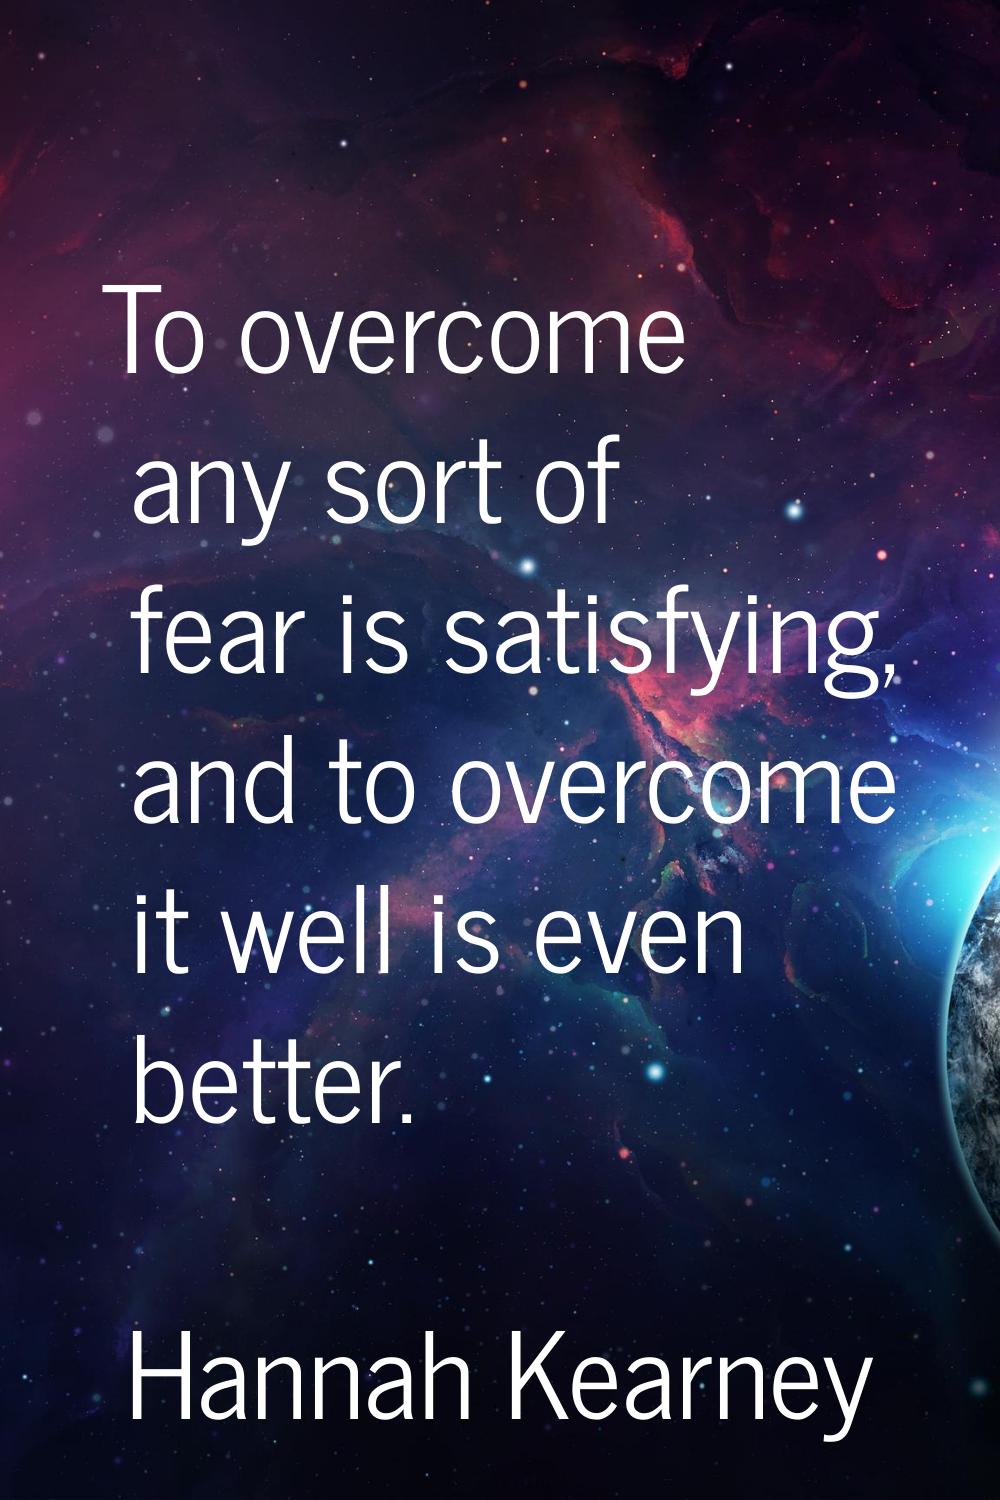 To overcome any sort of fear is satisfying, and to overcome it well is even better.